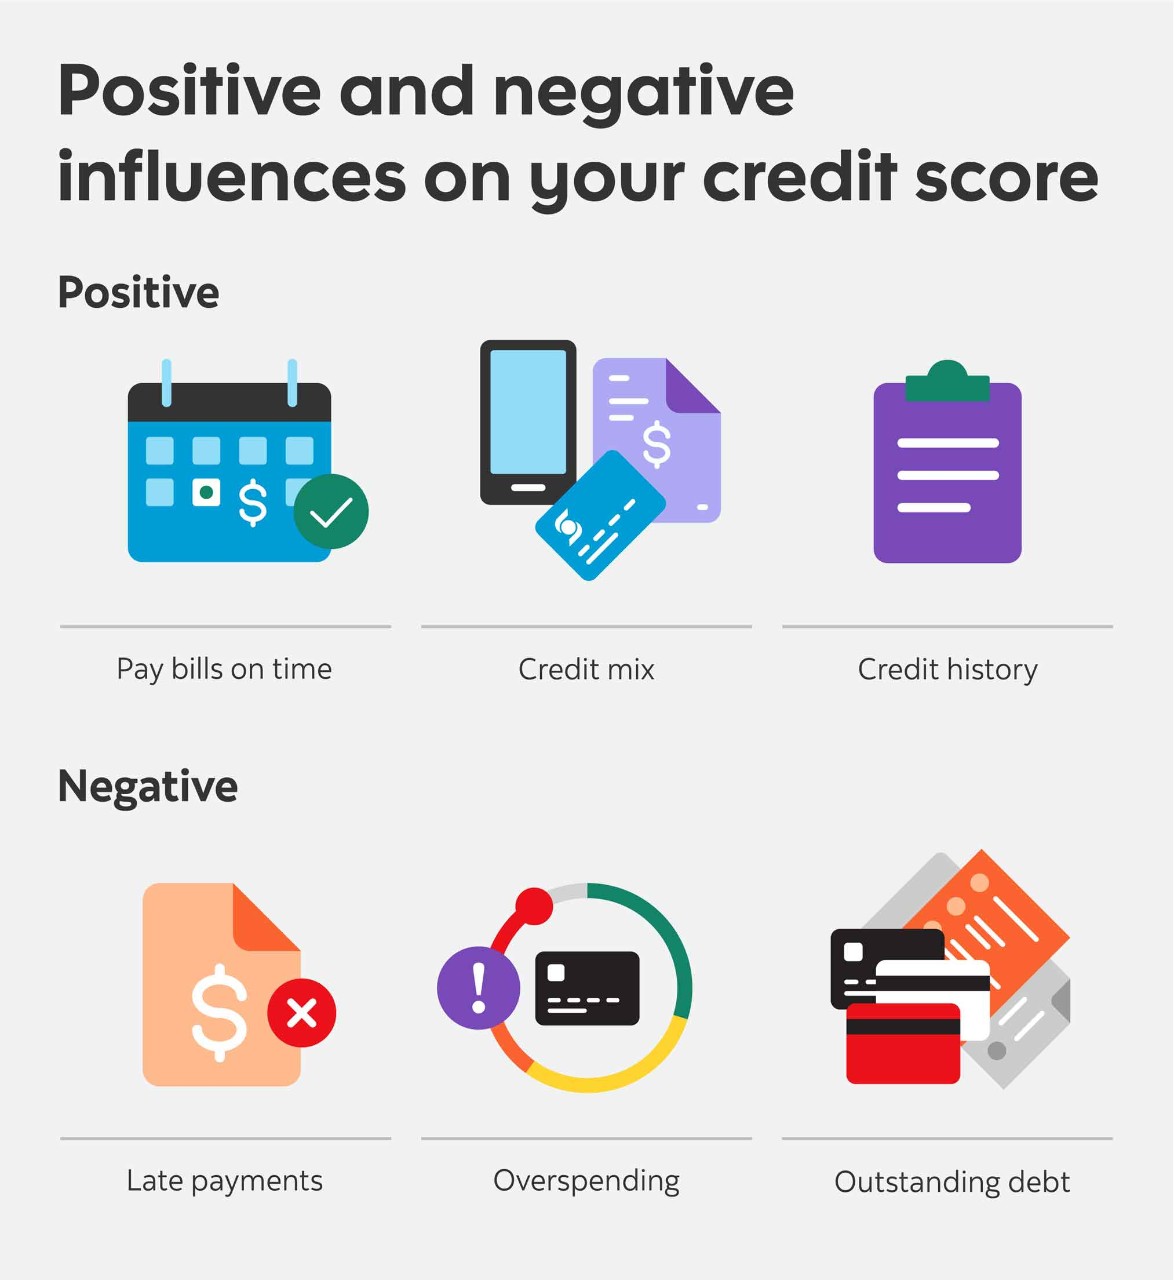 Positive and negative influences on your credit score. Positive: Pay bills on time, credit mix, credit history; Negative: Late payments, overspending, outstanding debt.